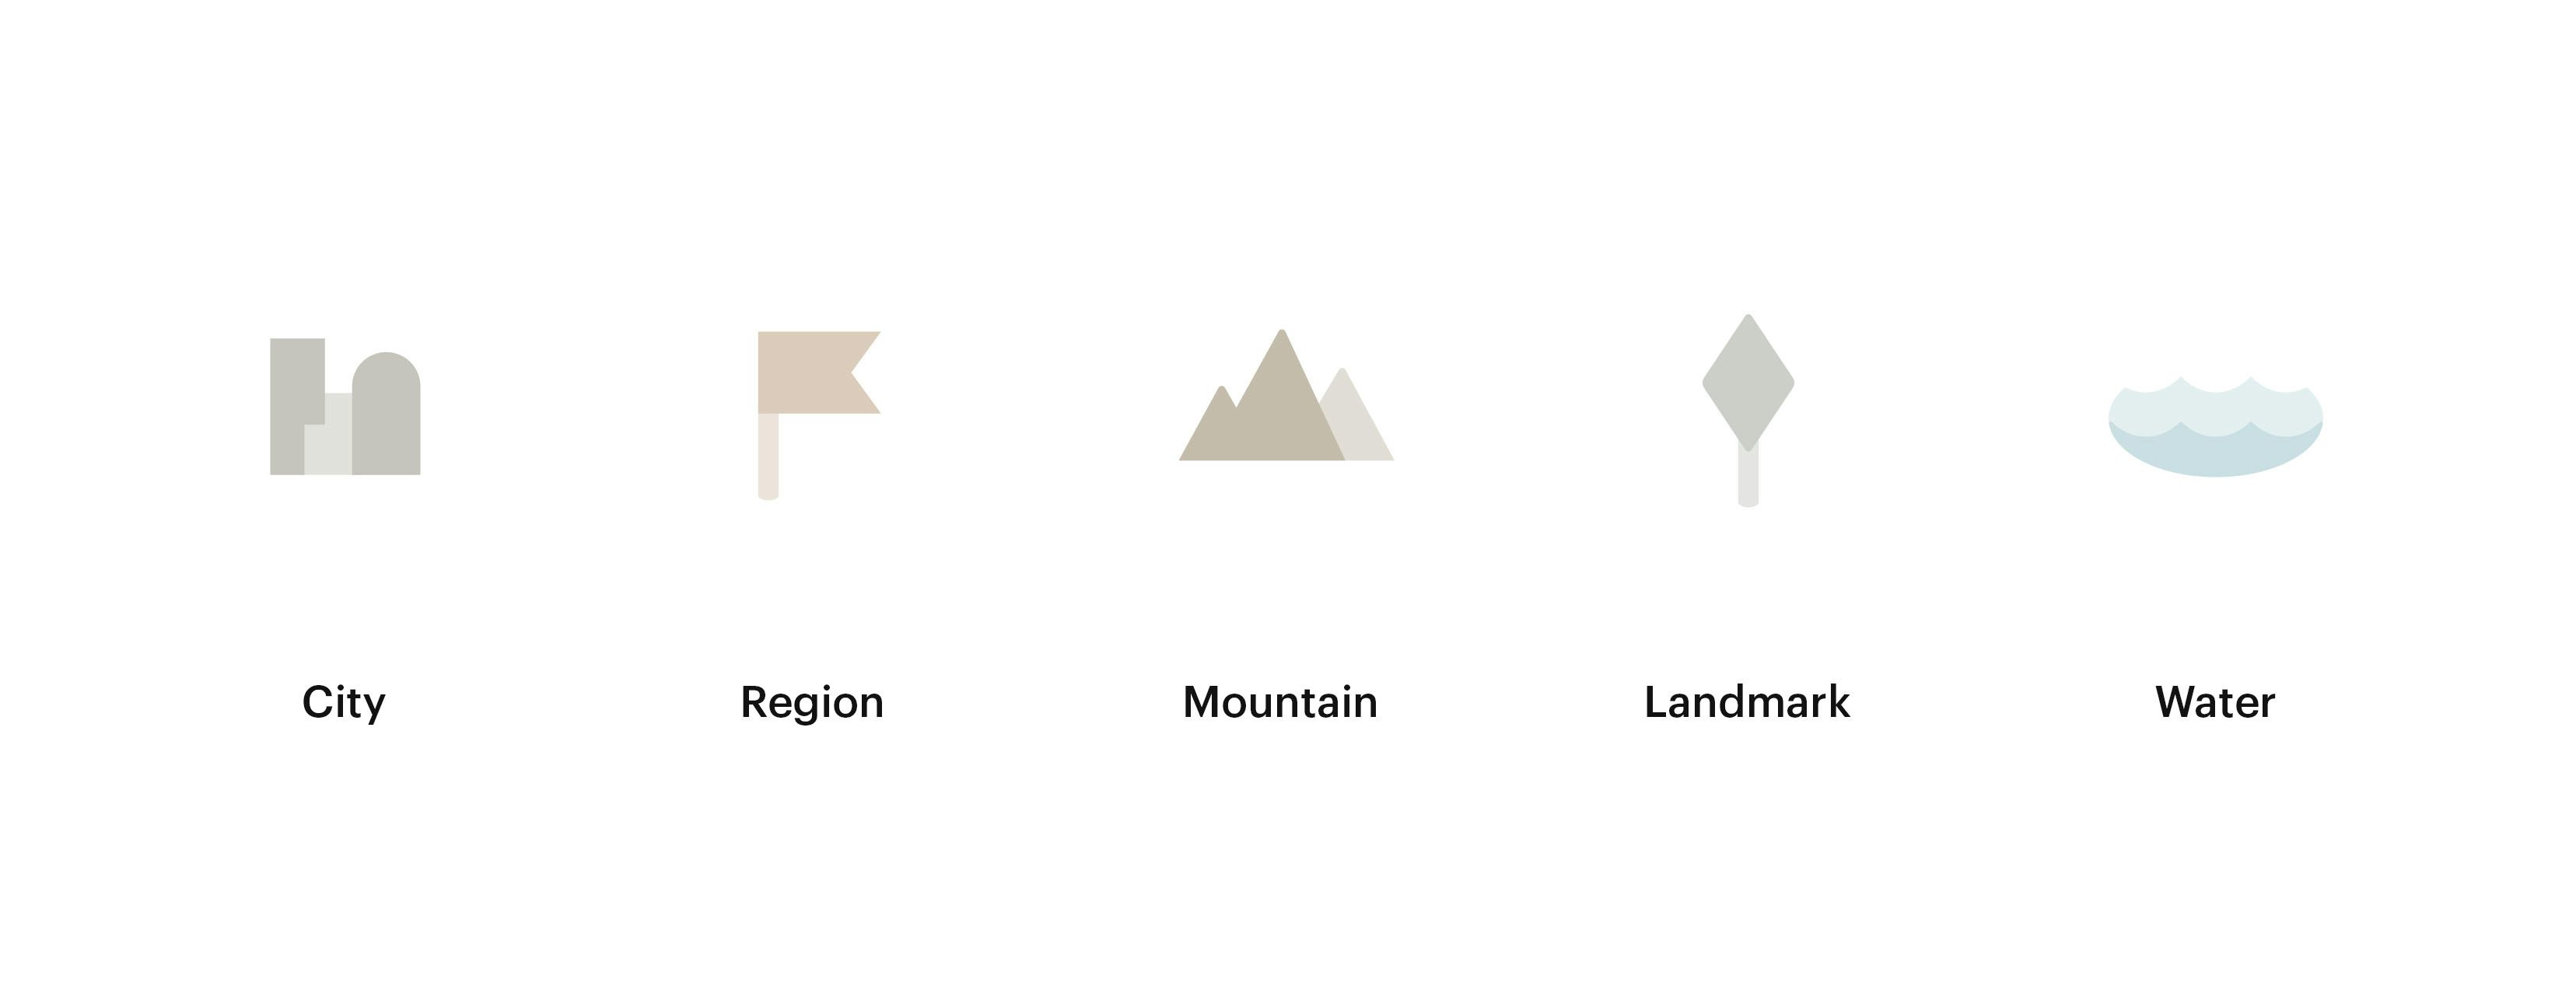 Map icons designed for the Sola mobile app.